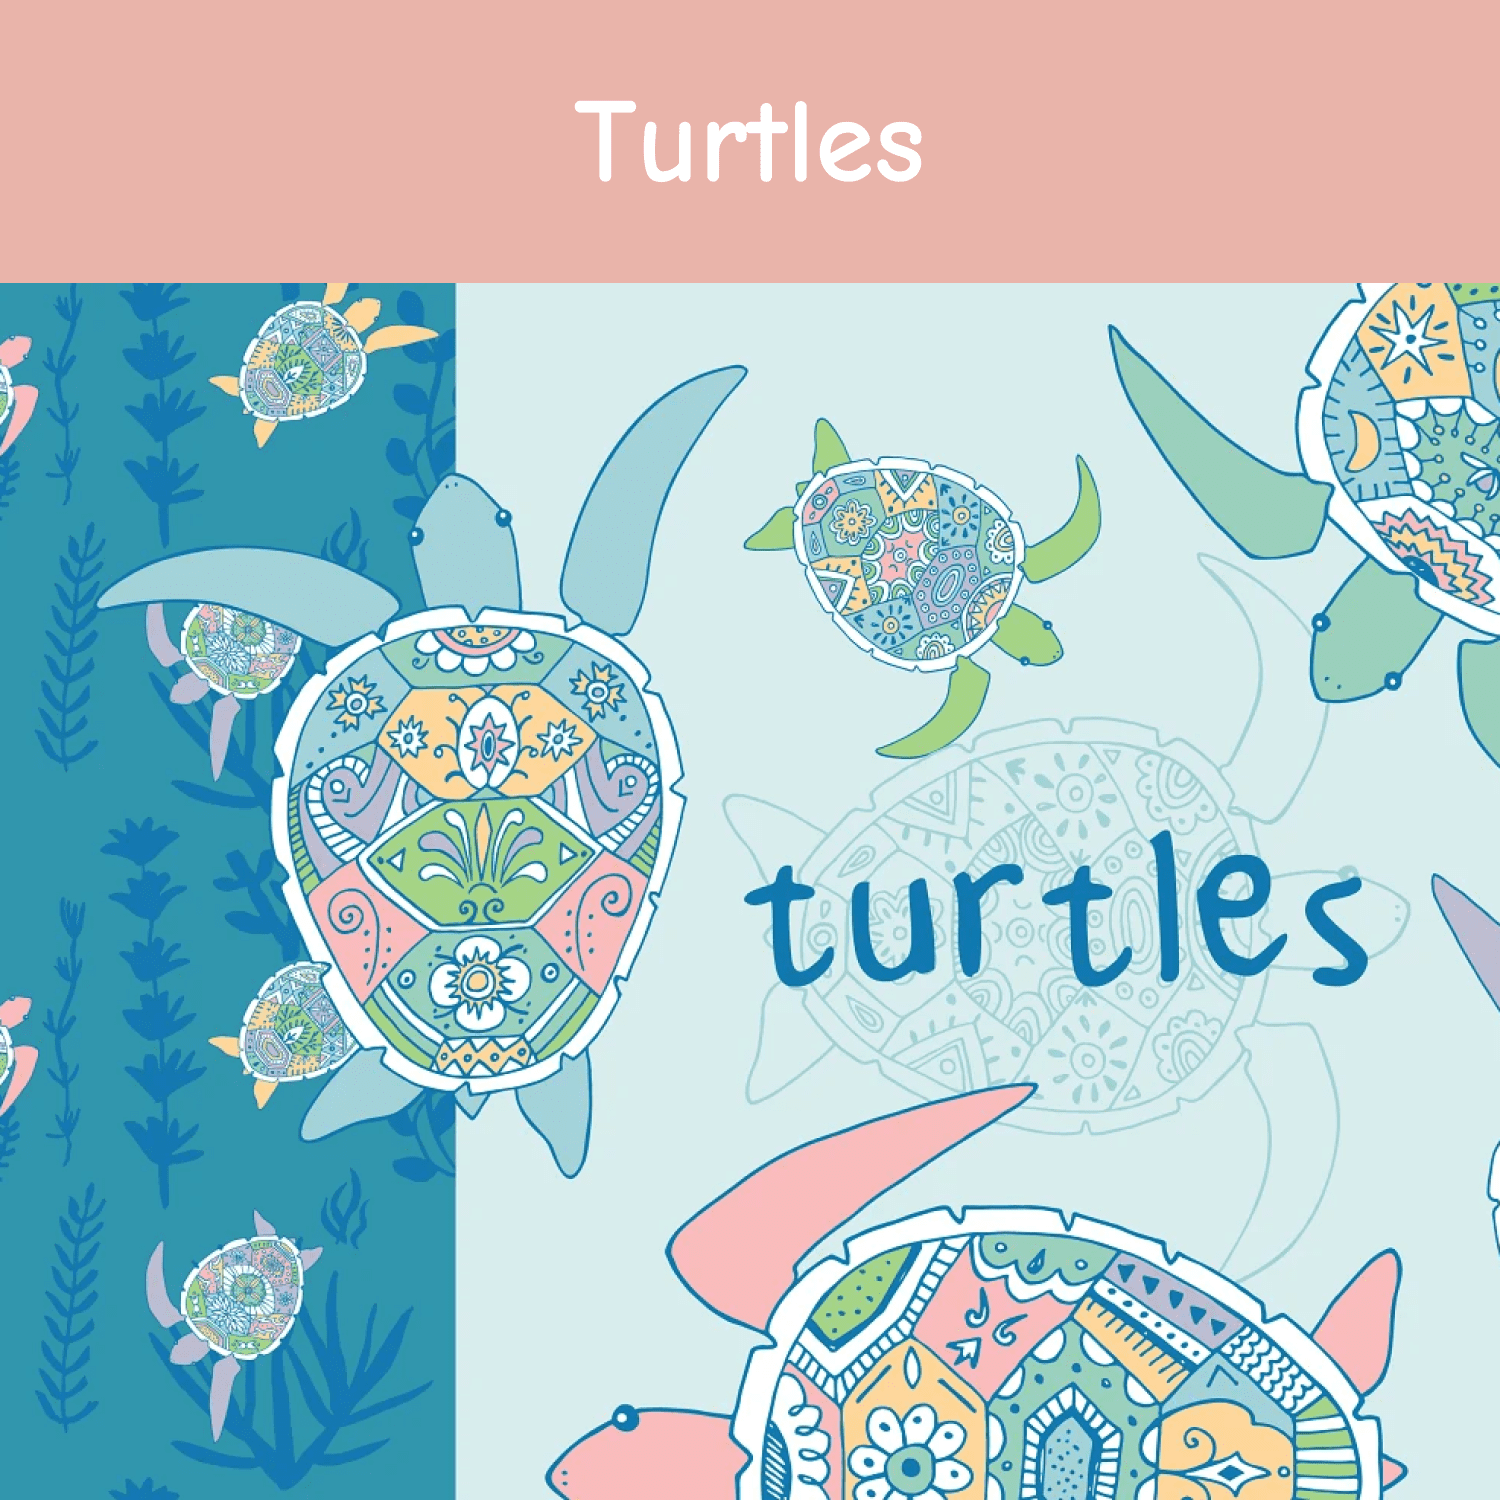 Turtles cover.